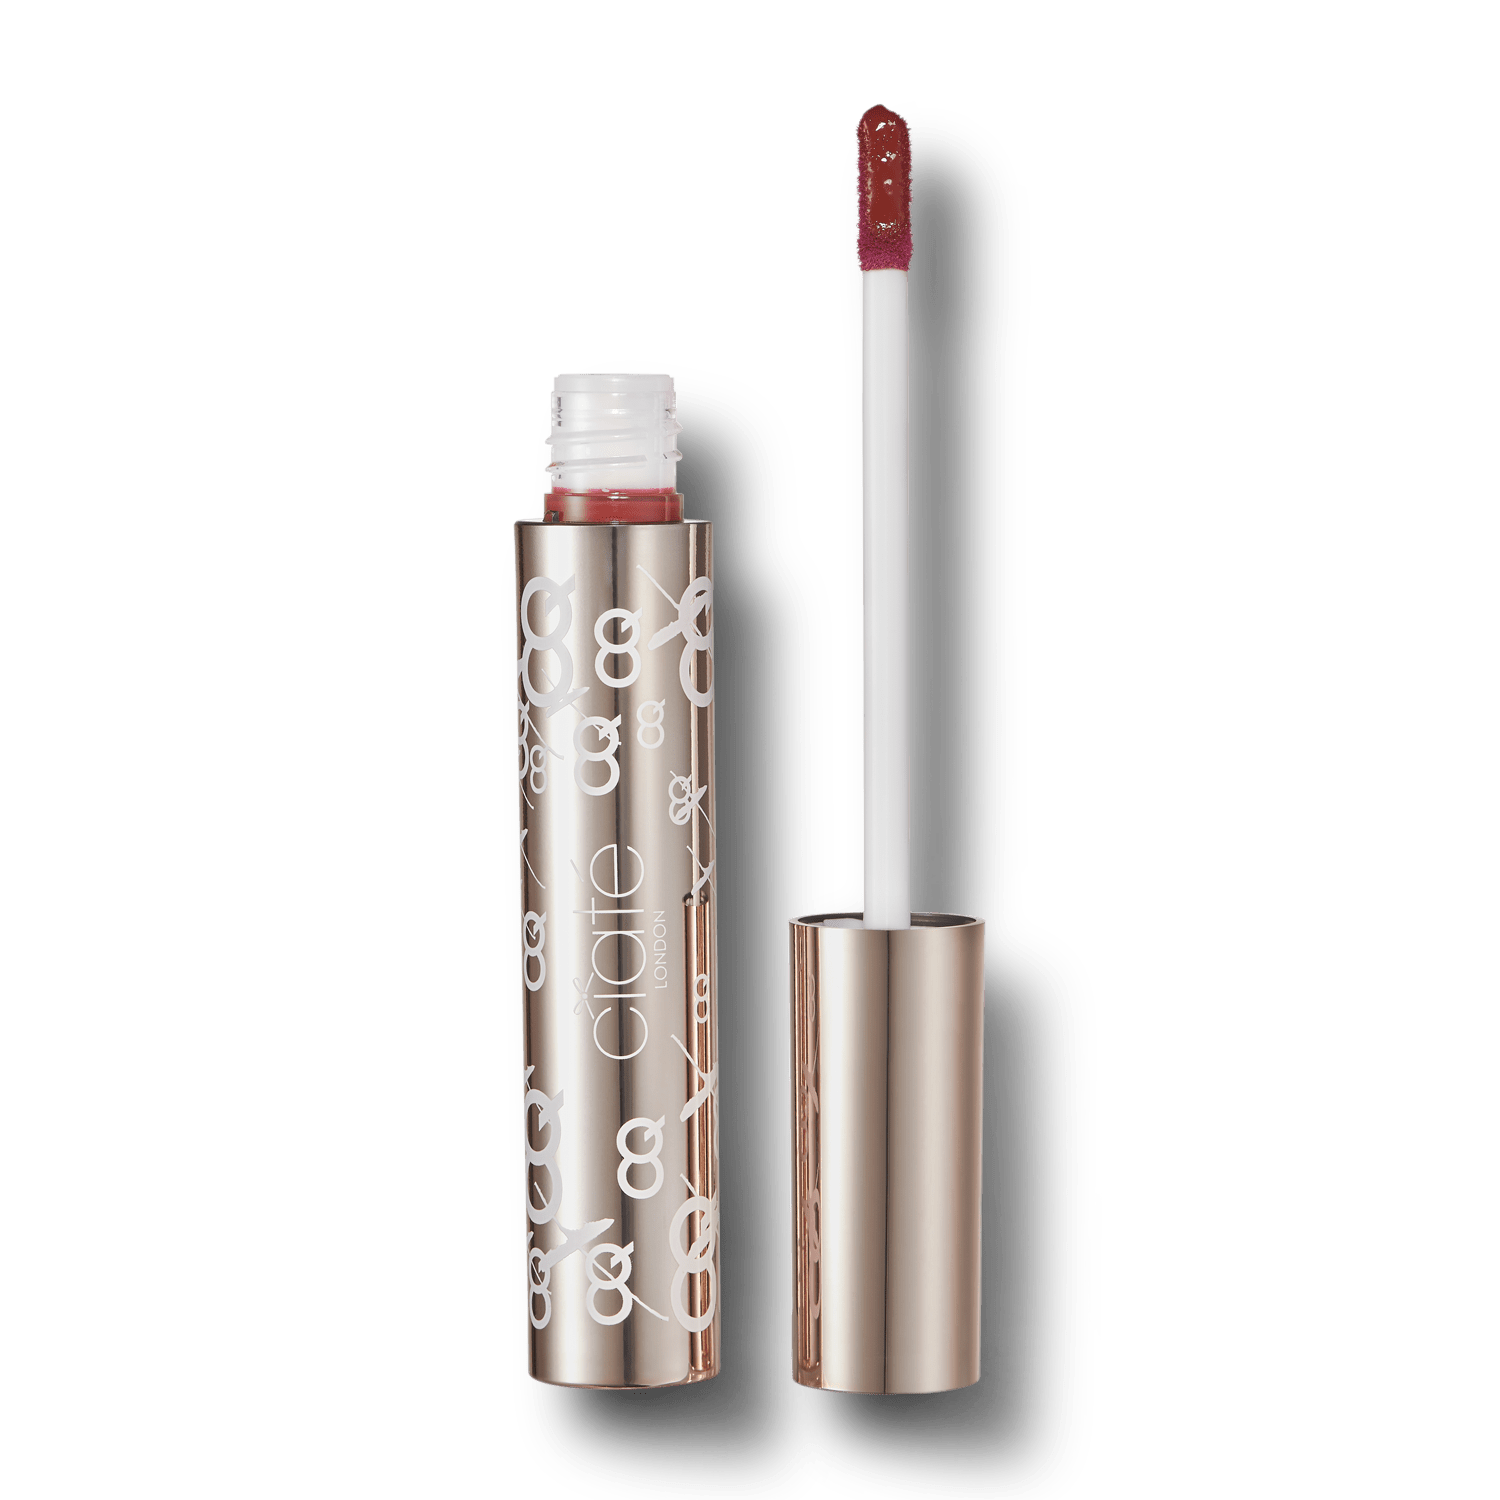 Christine Quinn Dishes on Her Makeup Collab With Ciaté